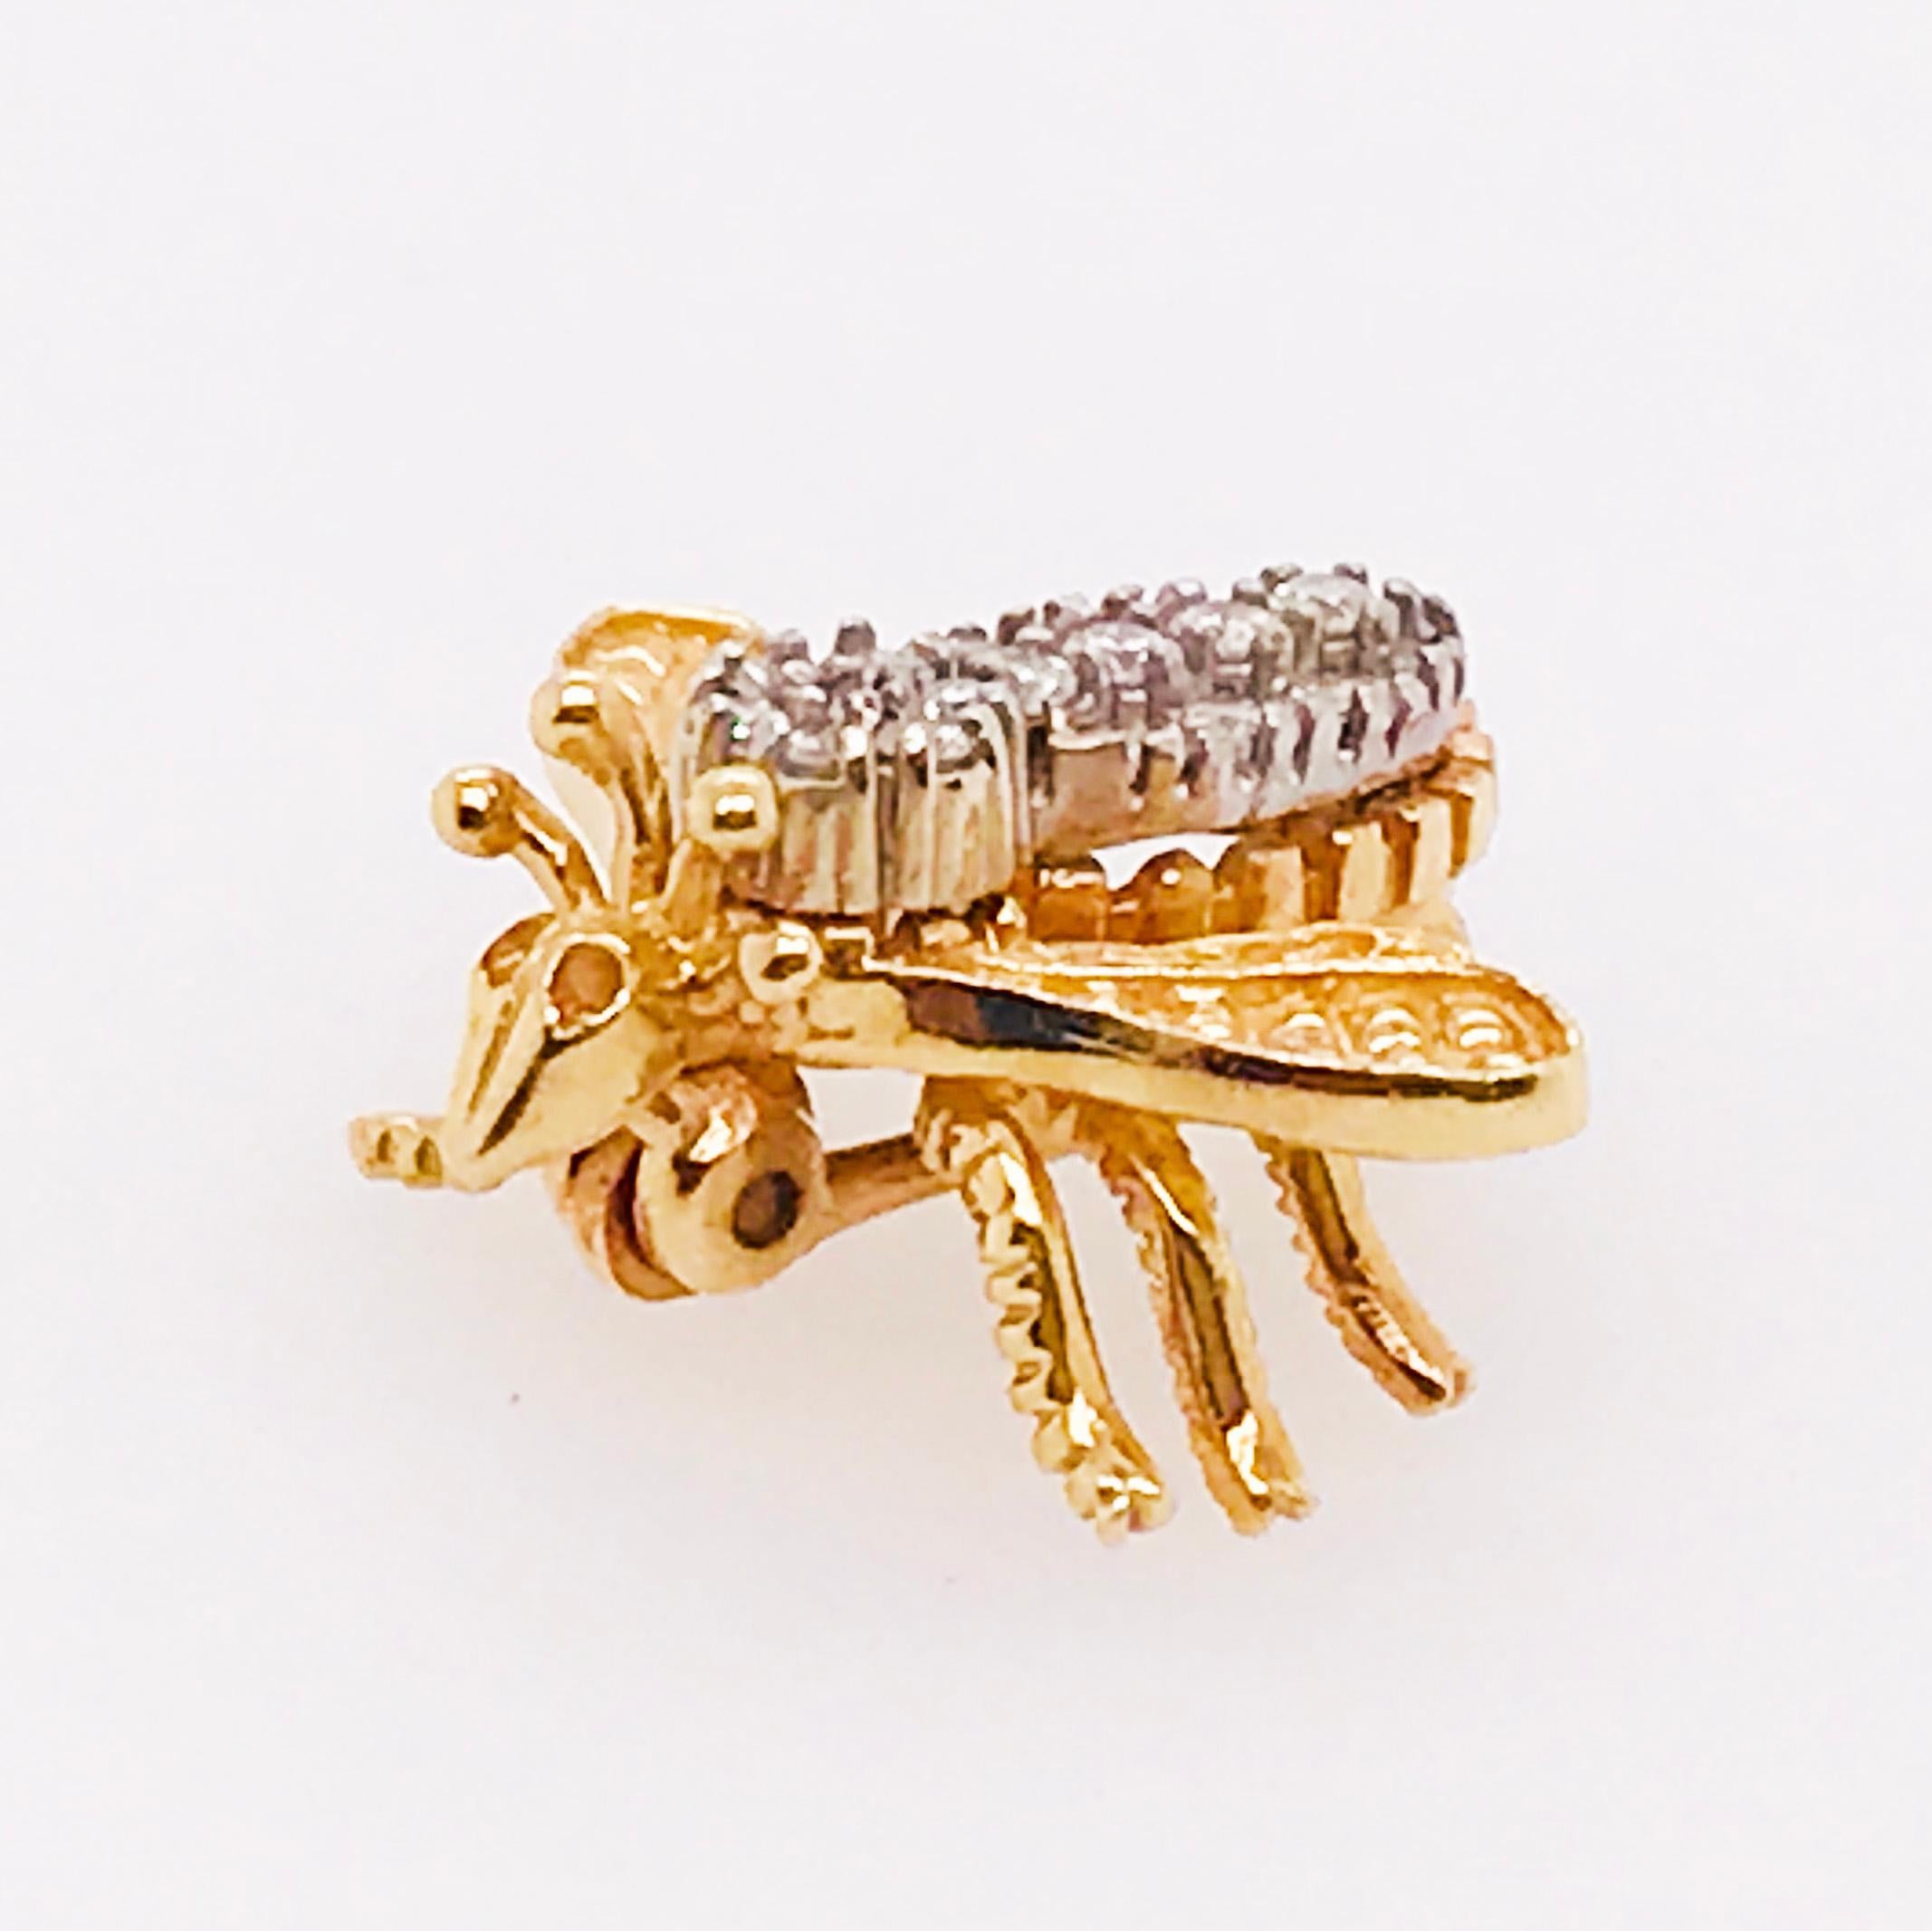 This adorable honey bee pin is paved in genuine natural round brilliant diamonds. There is a total of 0.20 carats total diamond weight. The diamonds are top quality, VS clarity and E-F Color! The honey bee is made with 14 karat yellow and white